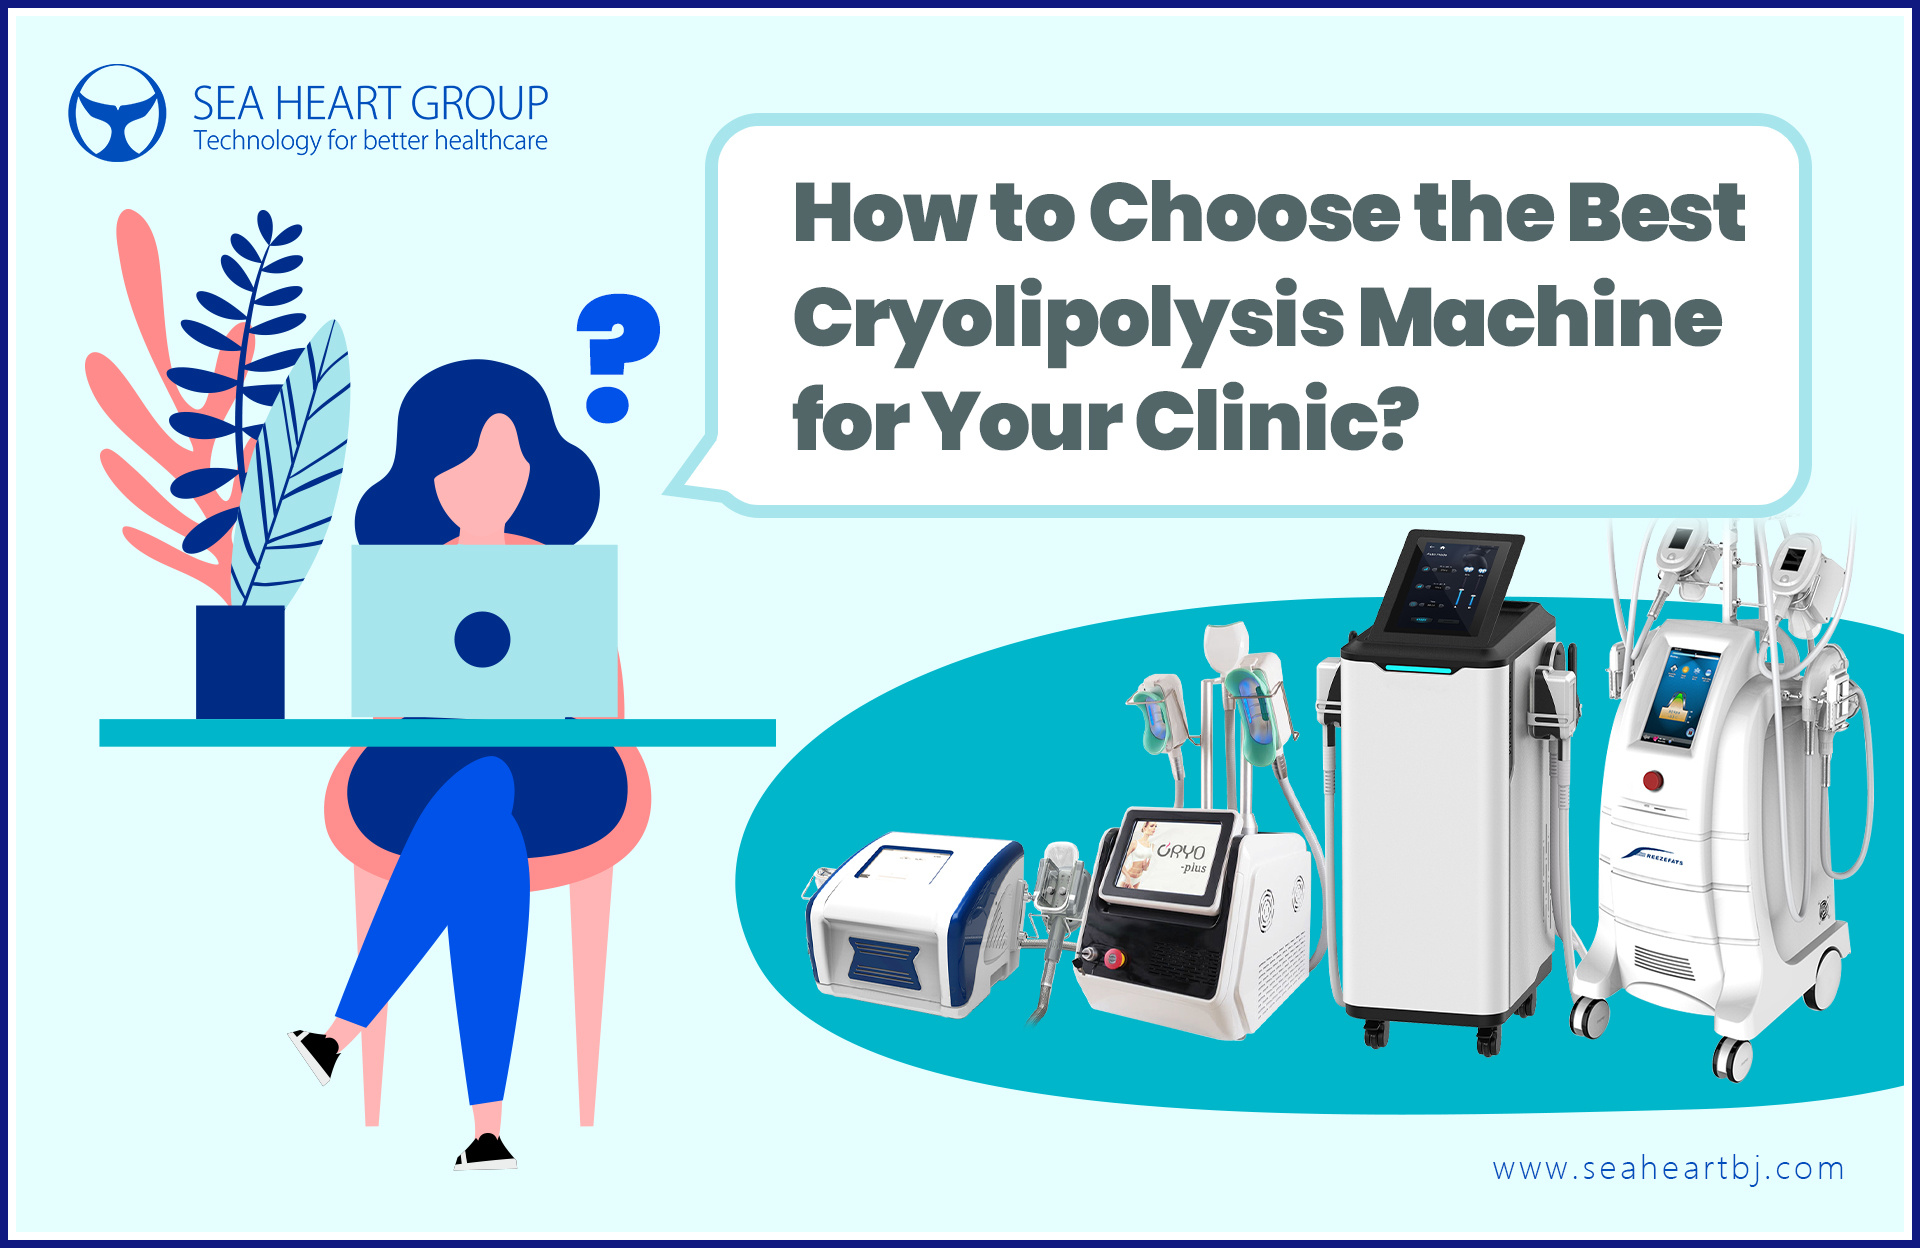 Choosing the Best Cryolipolysis Machine for Your Clinic